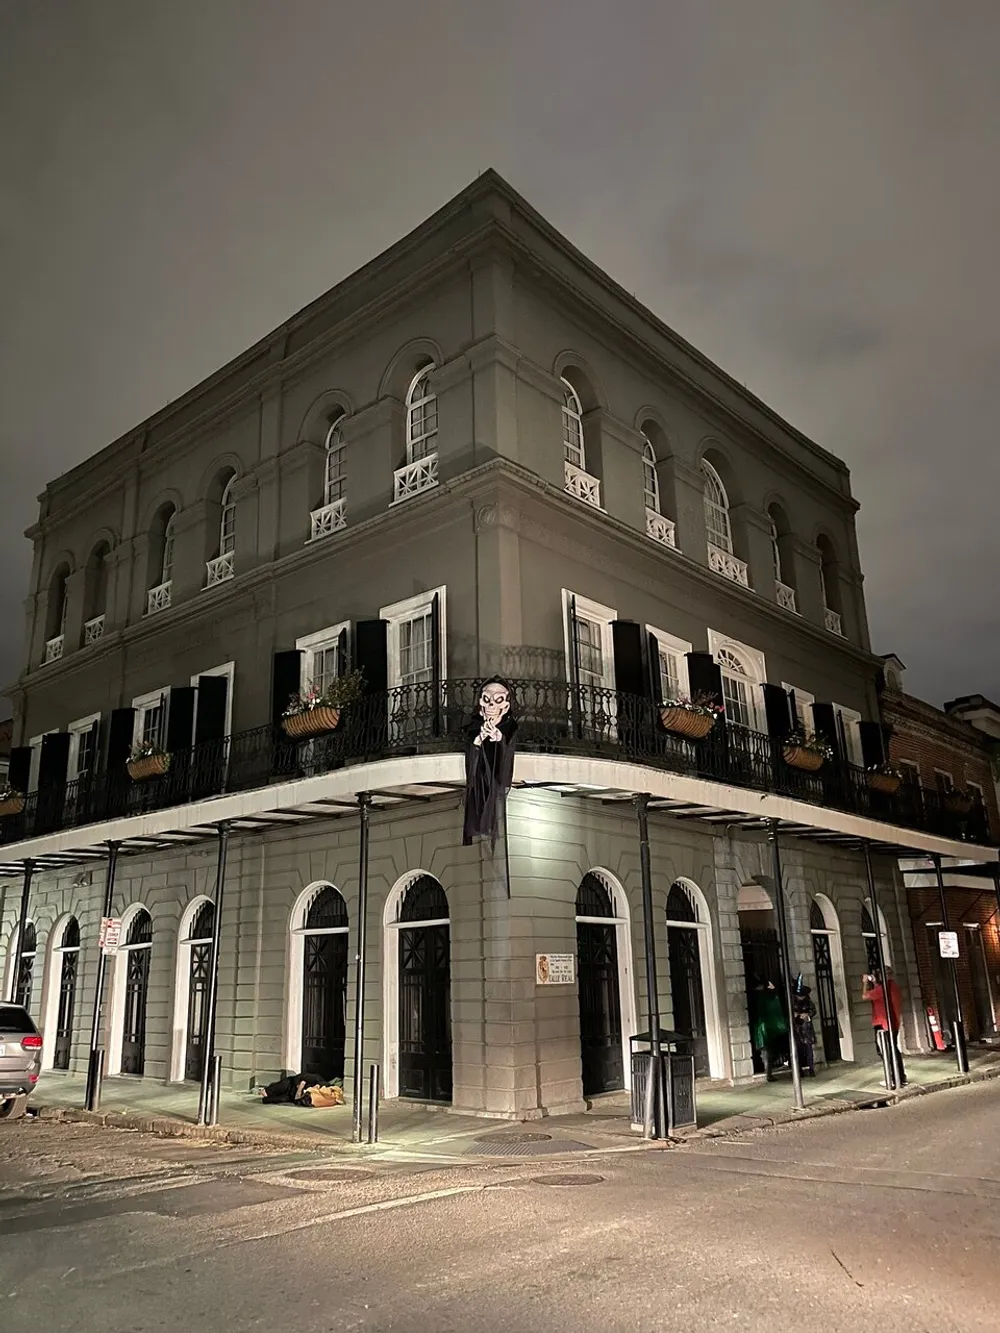 The image shows a two-story corner building at night with a figure resembling a skeleton hanging from a balcony creating a haunting and eerie atmosphere